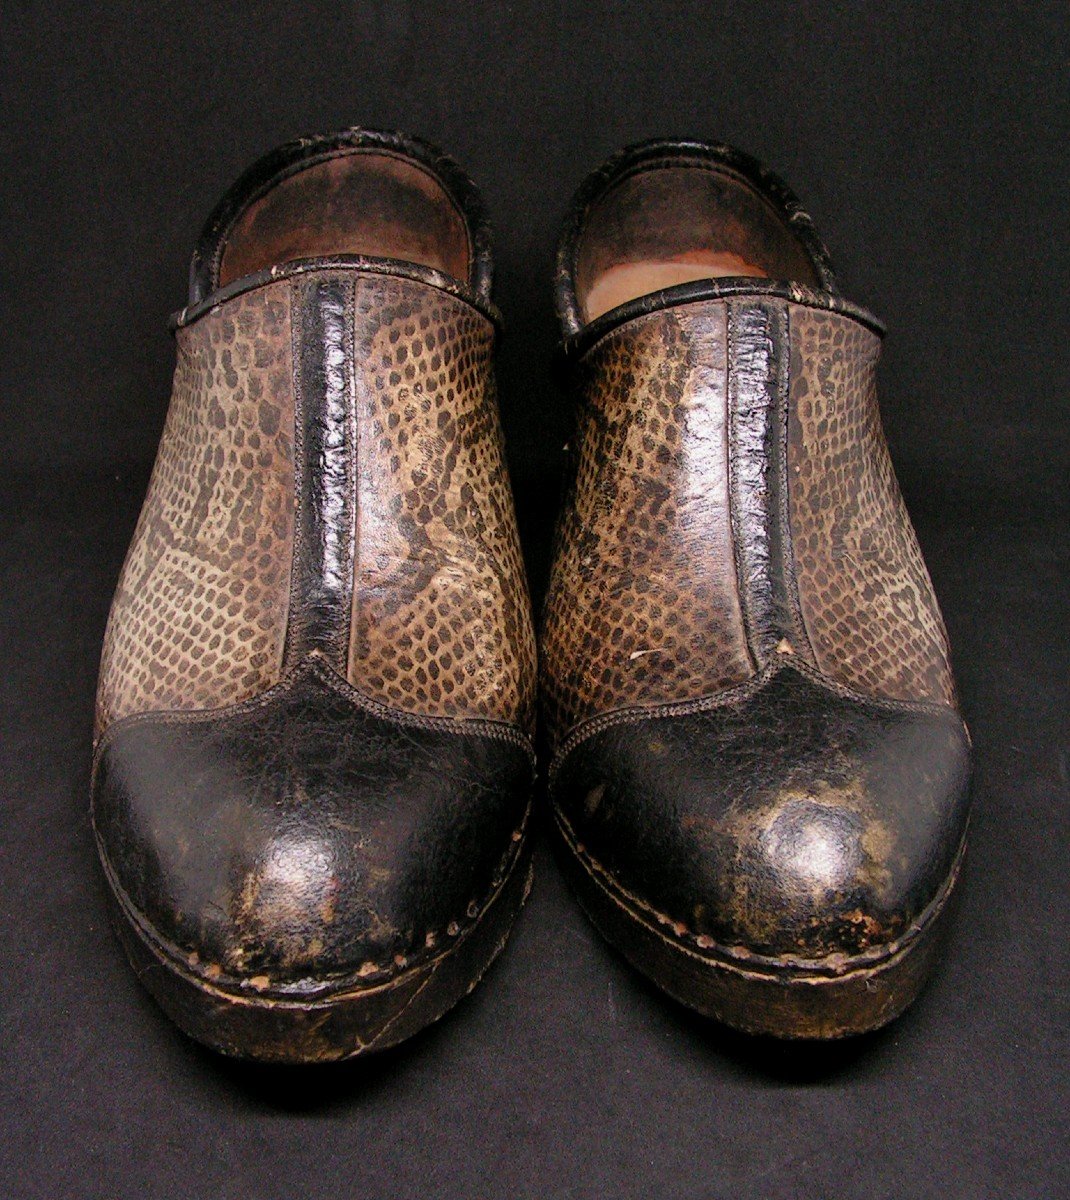 Pair Of Women's Clogs Or Galoshes Imitation Lizard Leather And Wood-photo-2